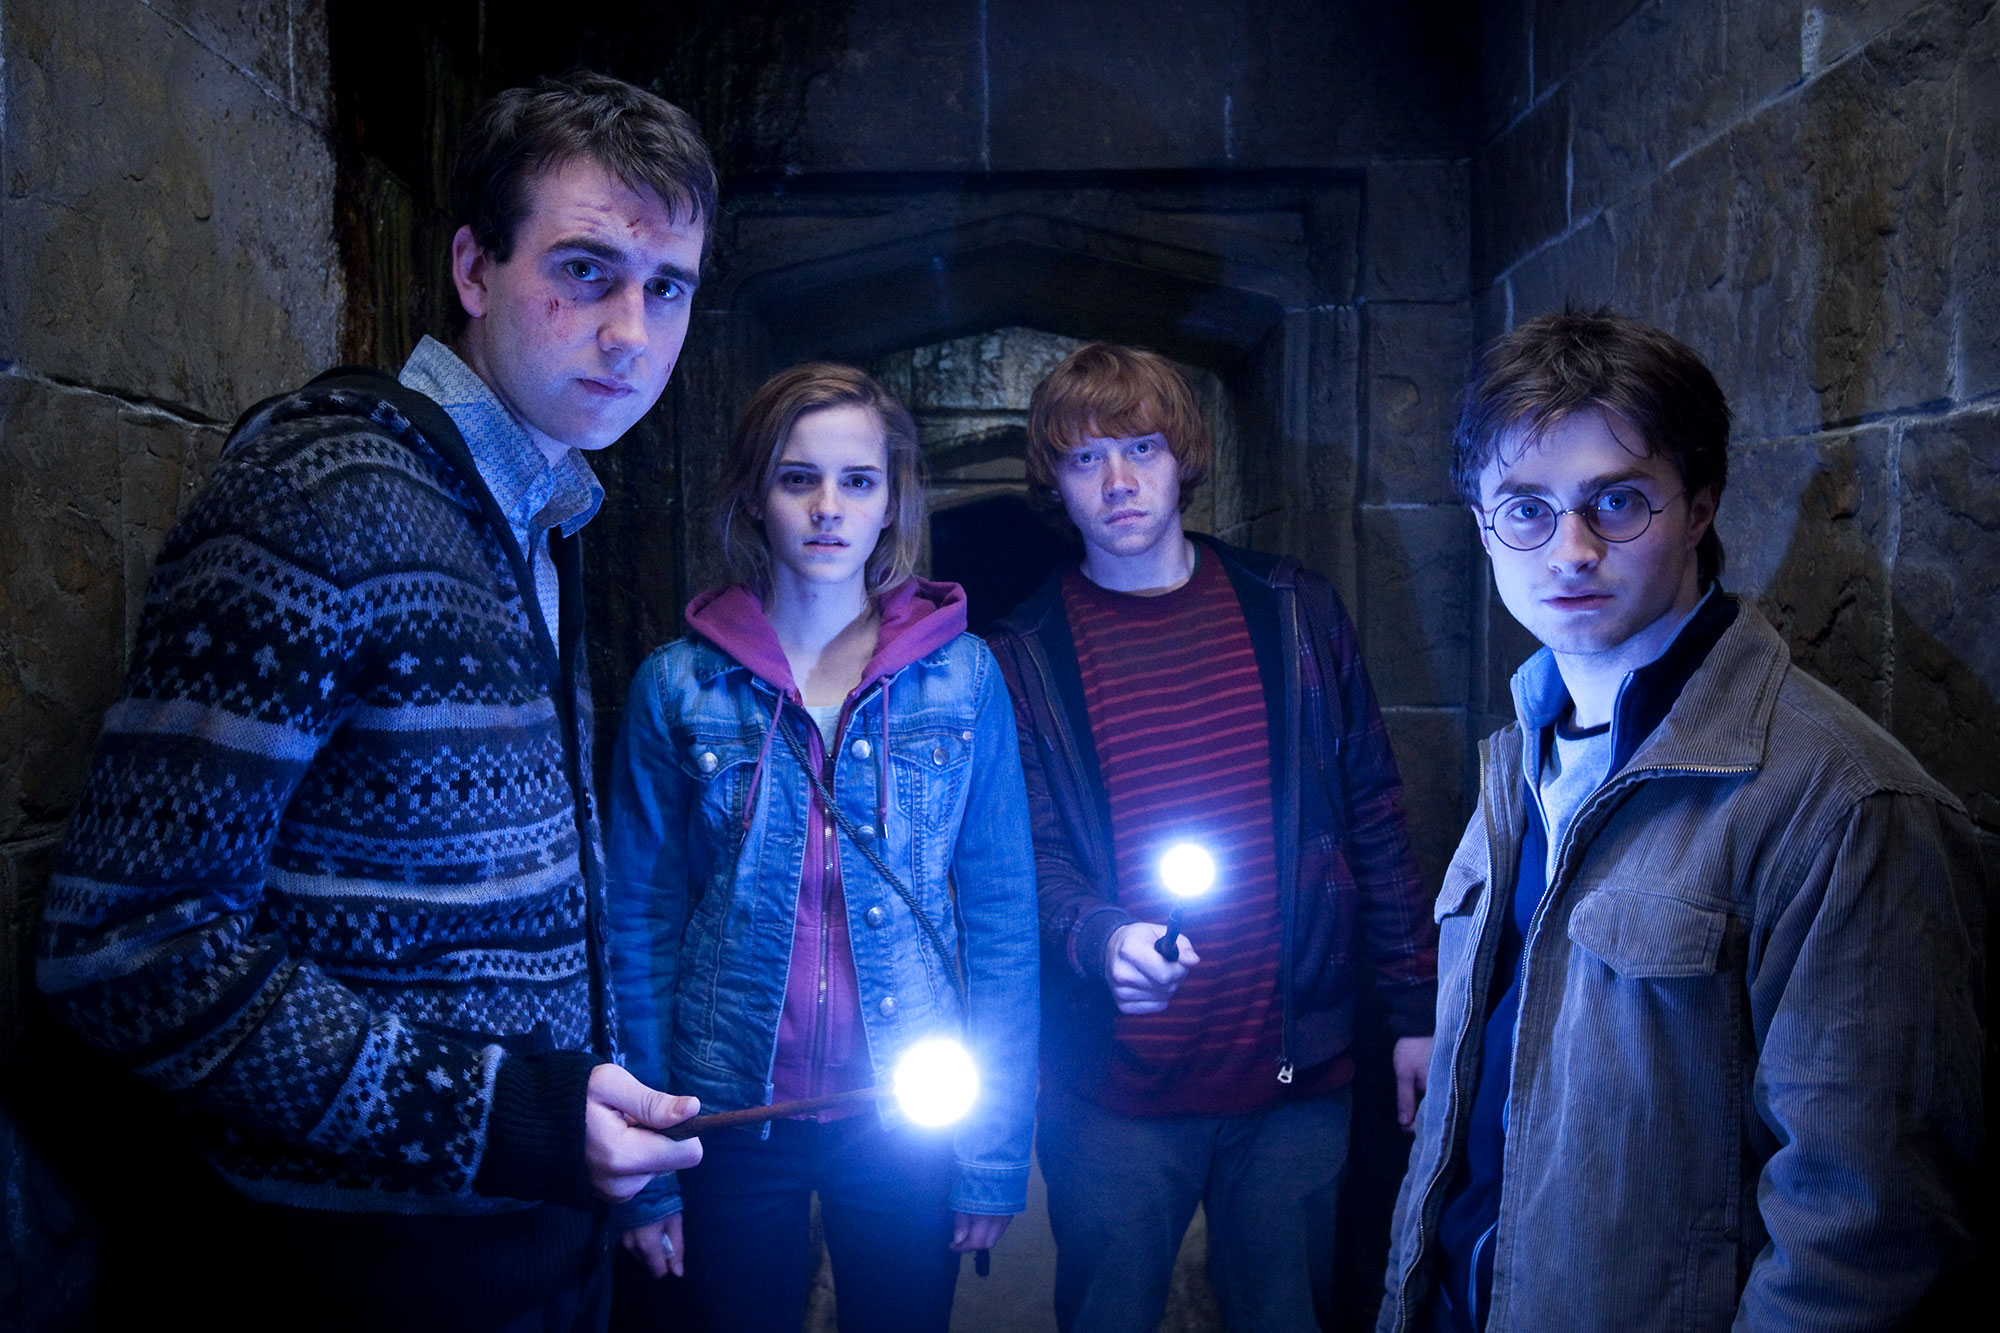 WB-F8-Deathly-Hallows-Neville-Harry-Ron-Hermione-enter-Hogs-Head